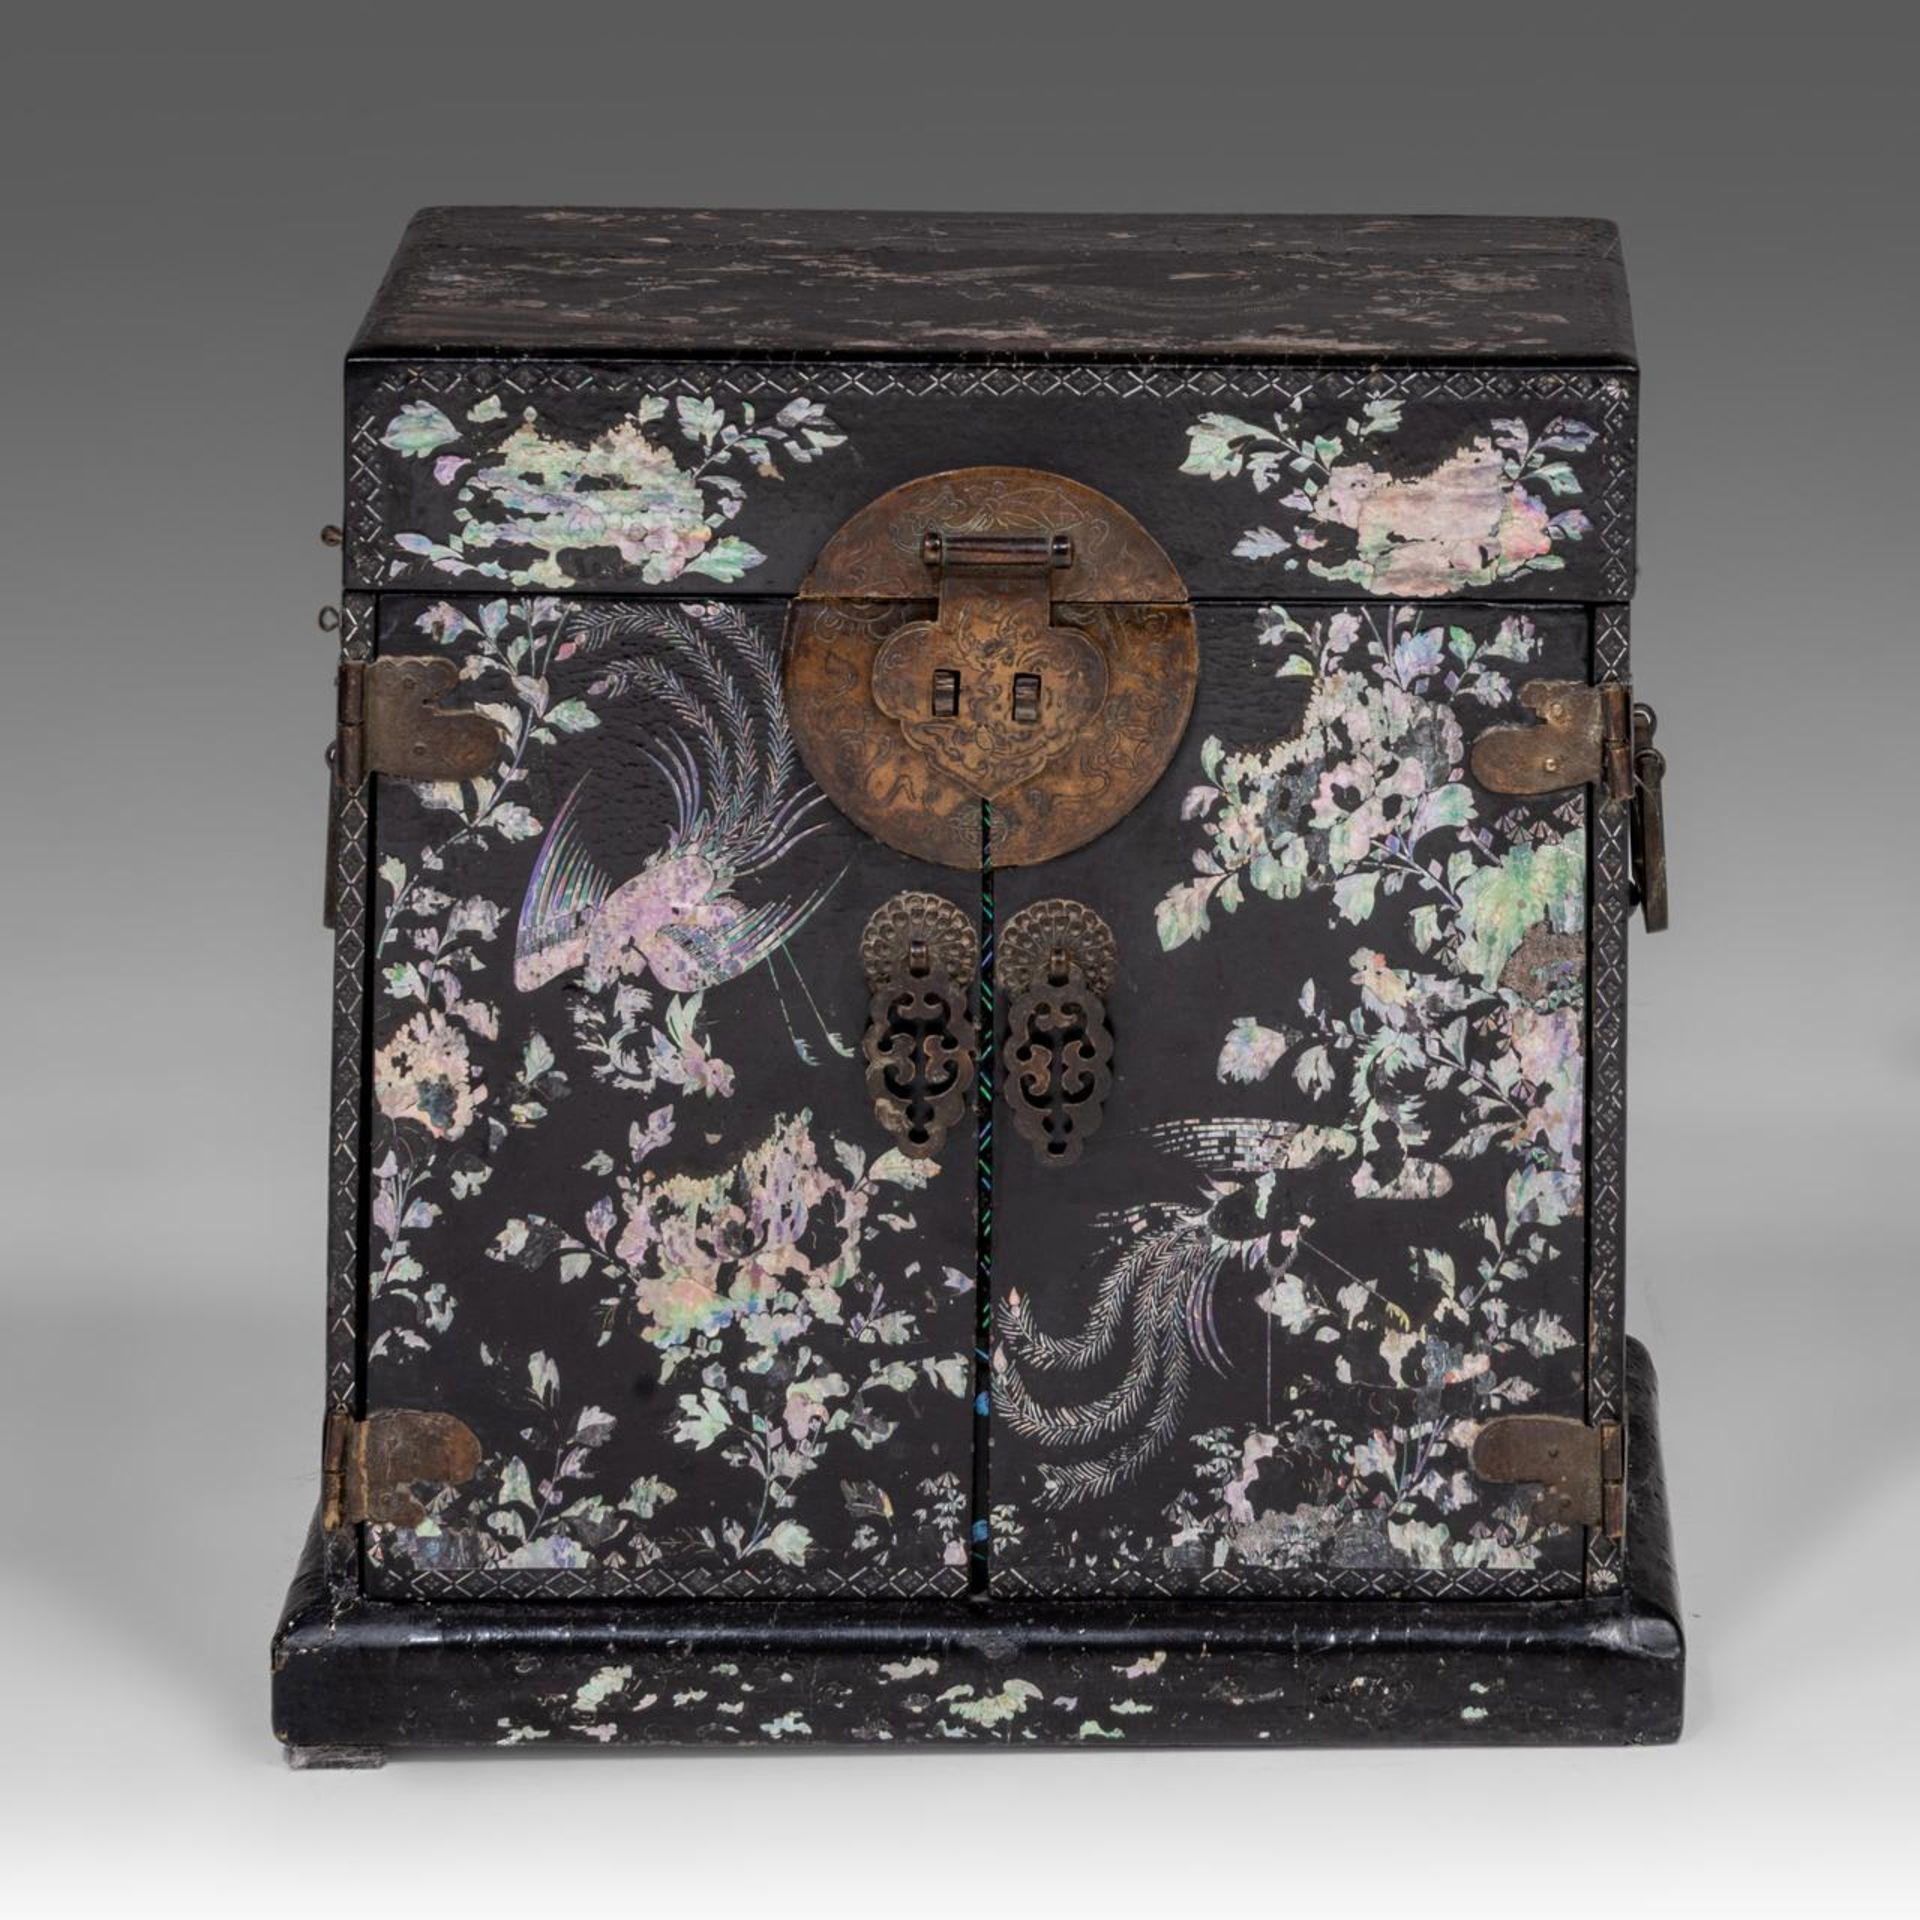 A Chinese lac burgaute travelling writing box or table cabinet, 17thC/18thC, H 31 - 28,5 x 21 cm - Image 4 of 7